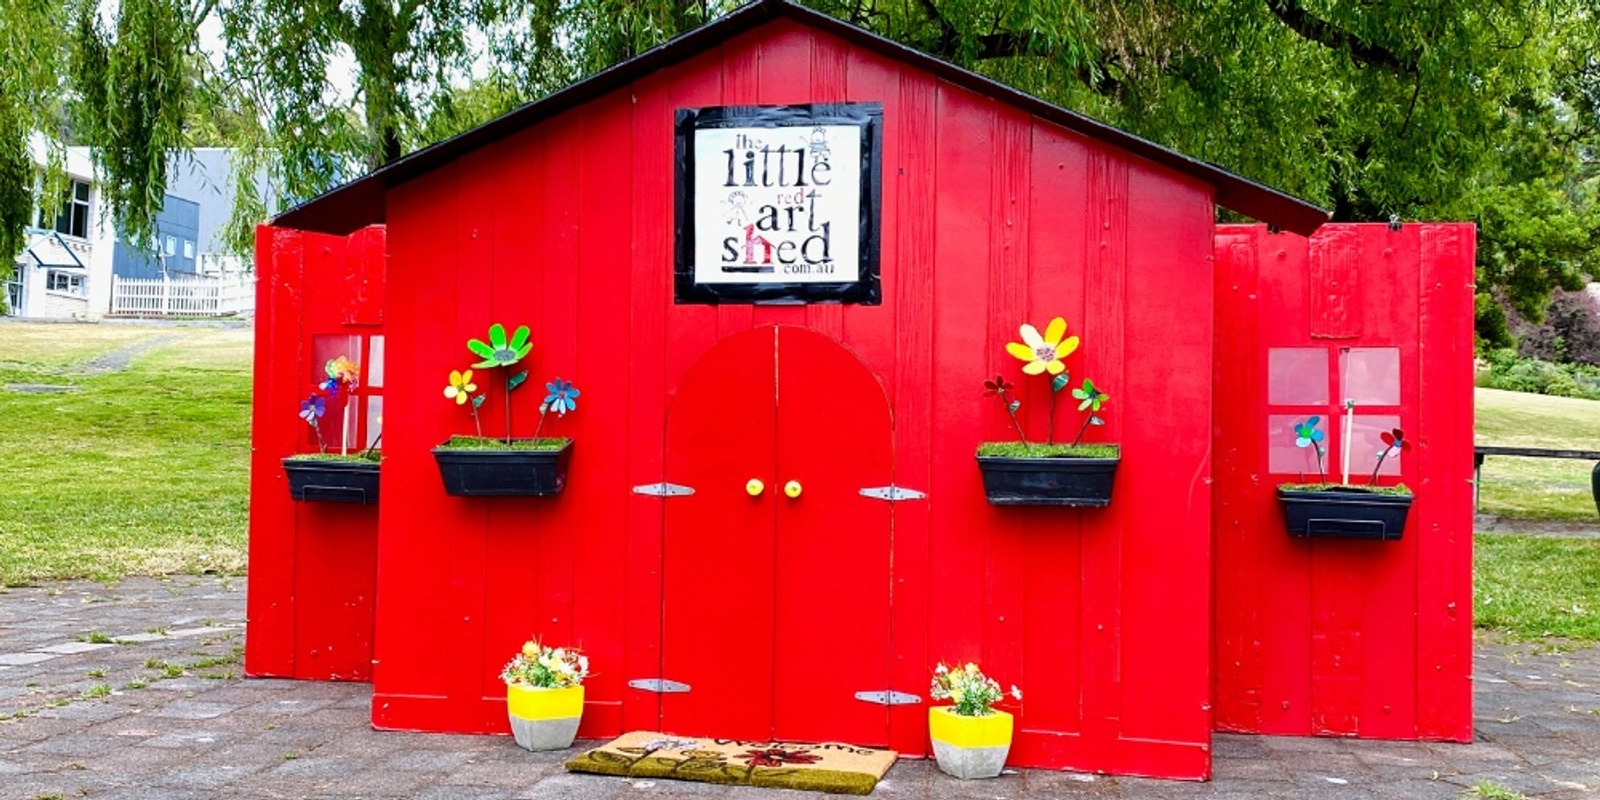 Summertime Pop-Up ARTplaydates with The Red Art Shed | Humanitix